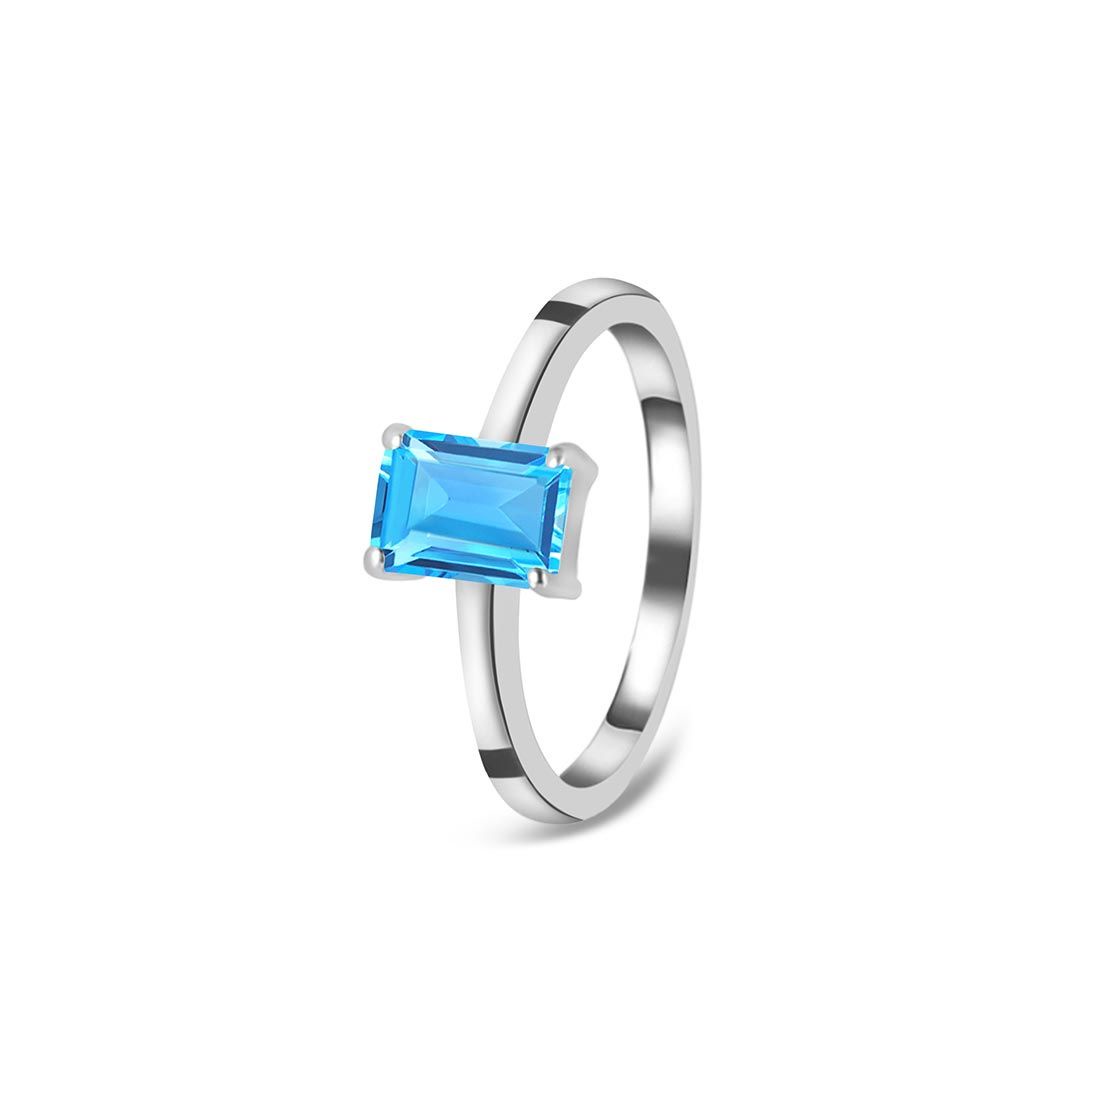 Let's Spark Boldness With The Swiss Blue Ring